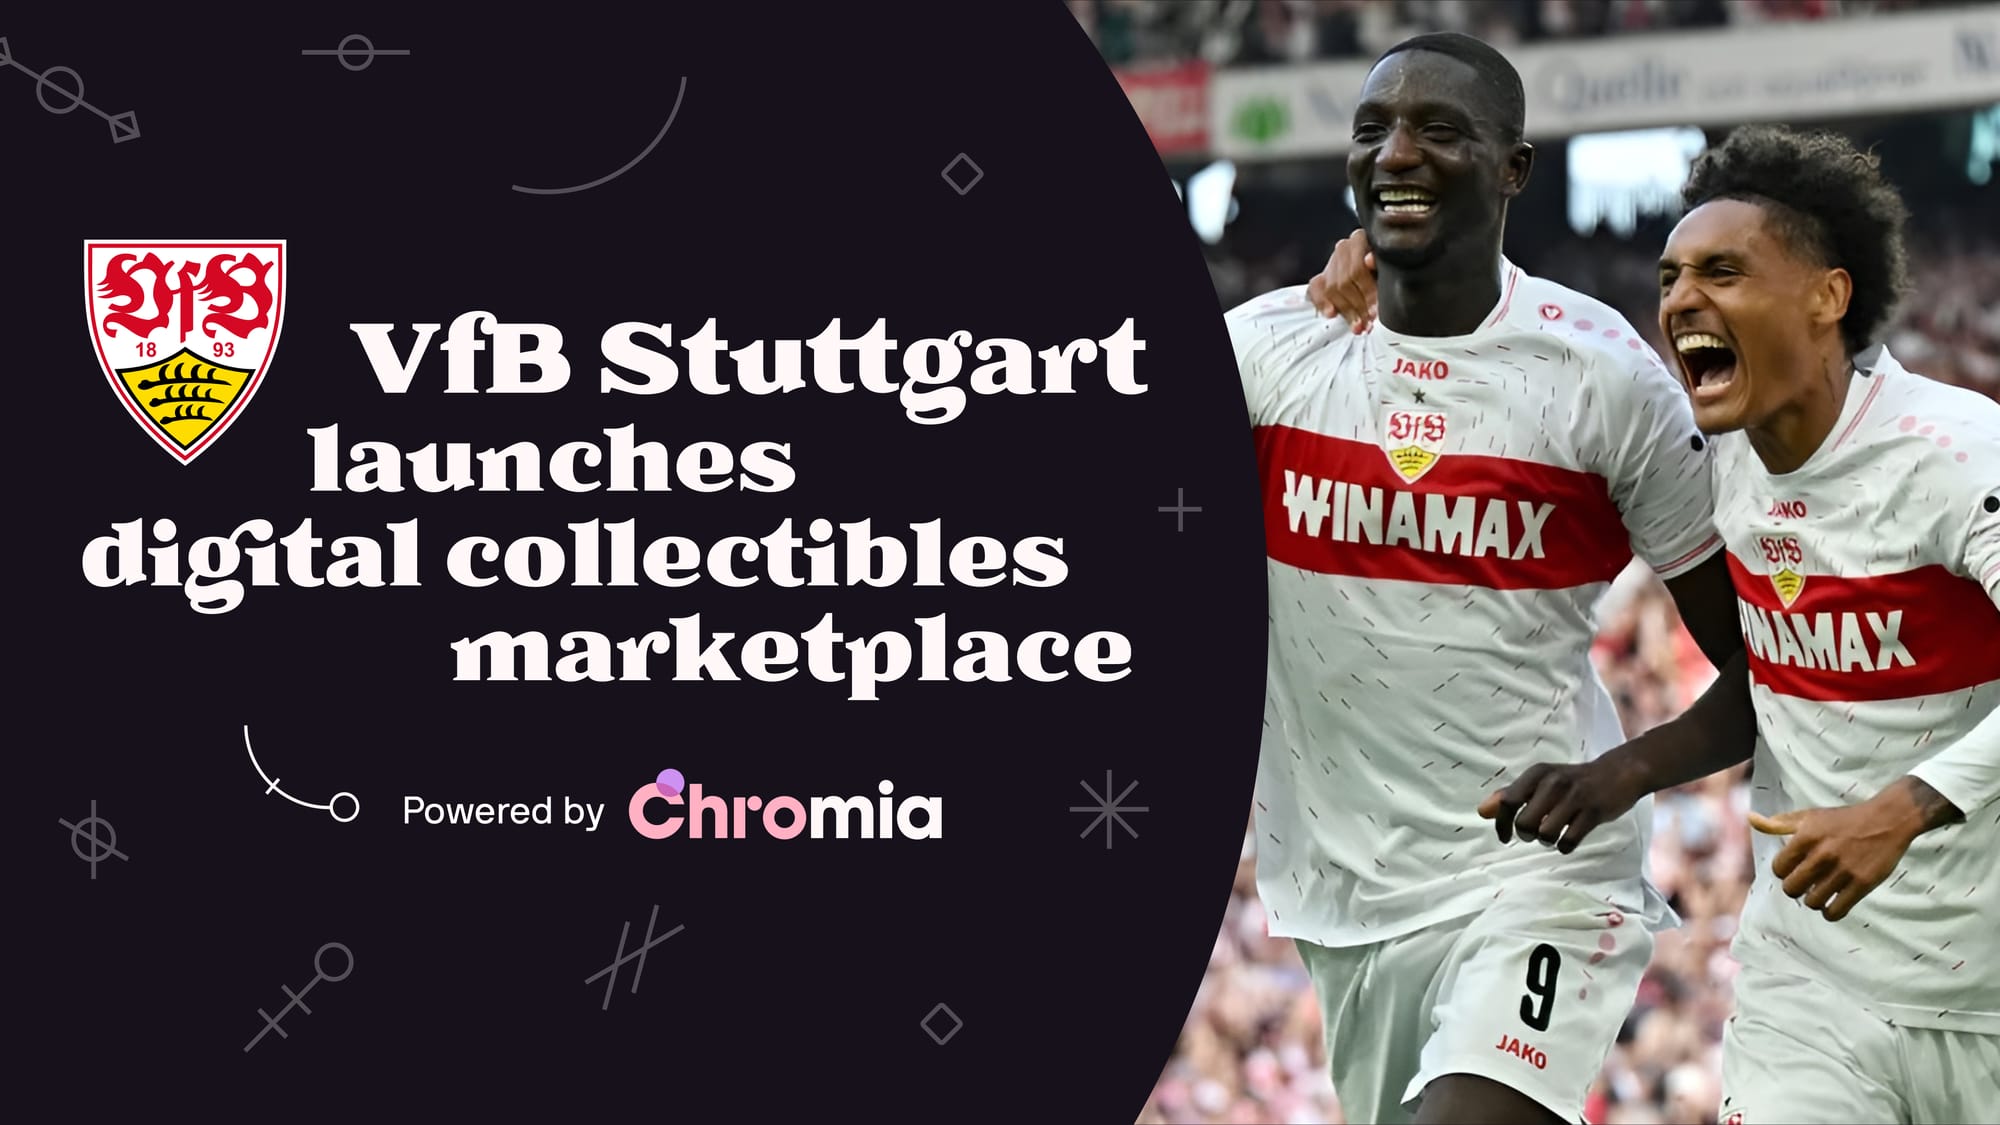 VfB Stuttgart Launches Digital Collectibles Marketplace Powered by Chromia